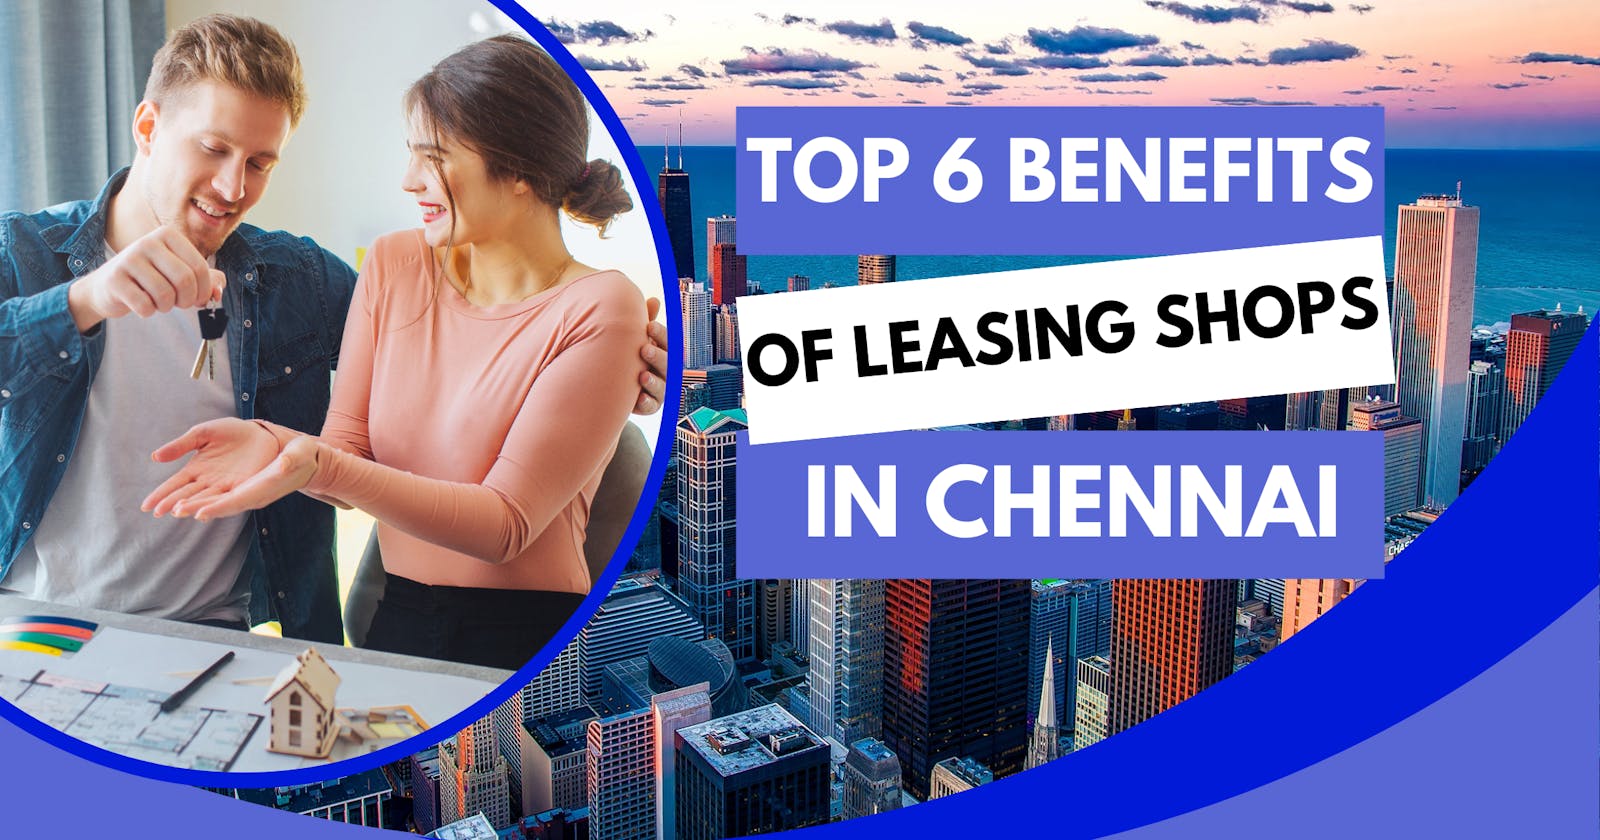 Top 6 Benefits of Leasing Shops in Chennai